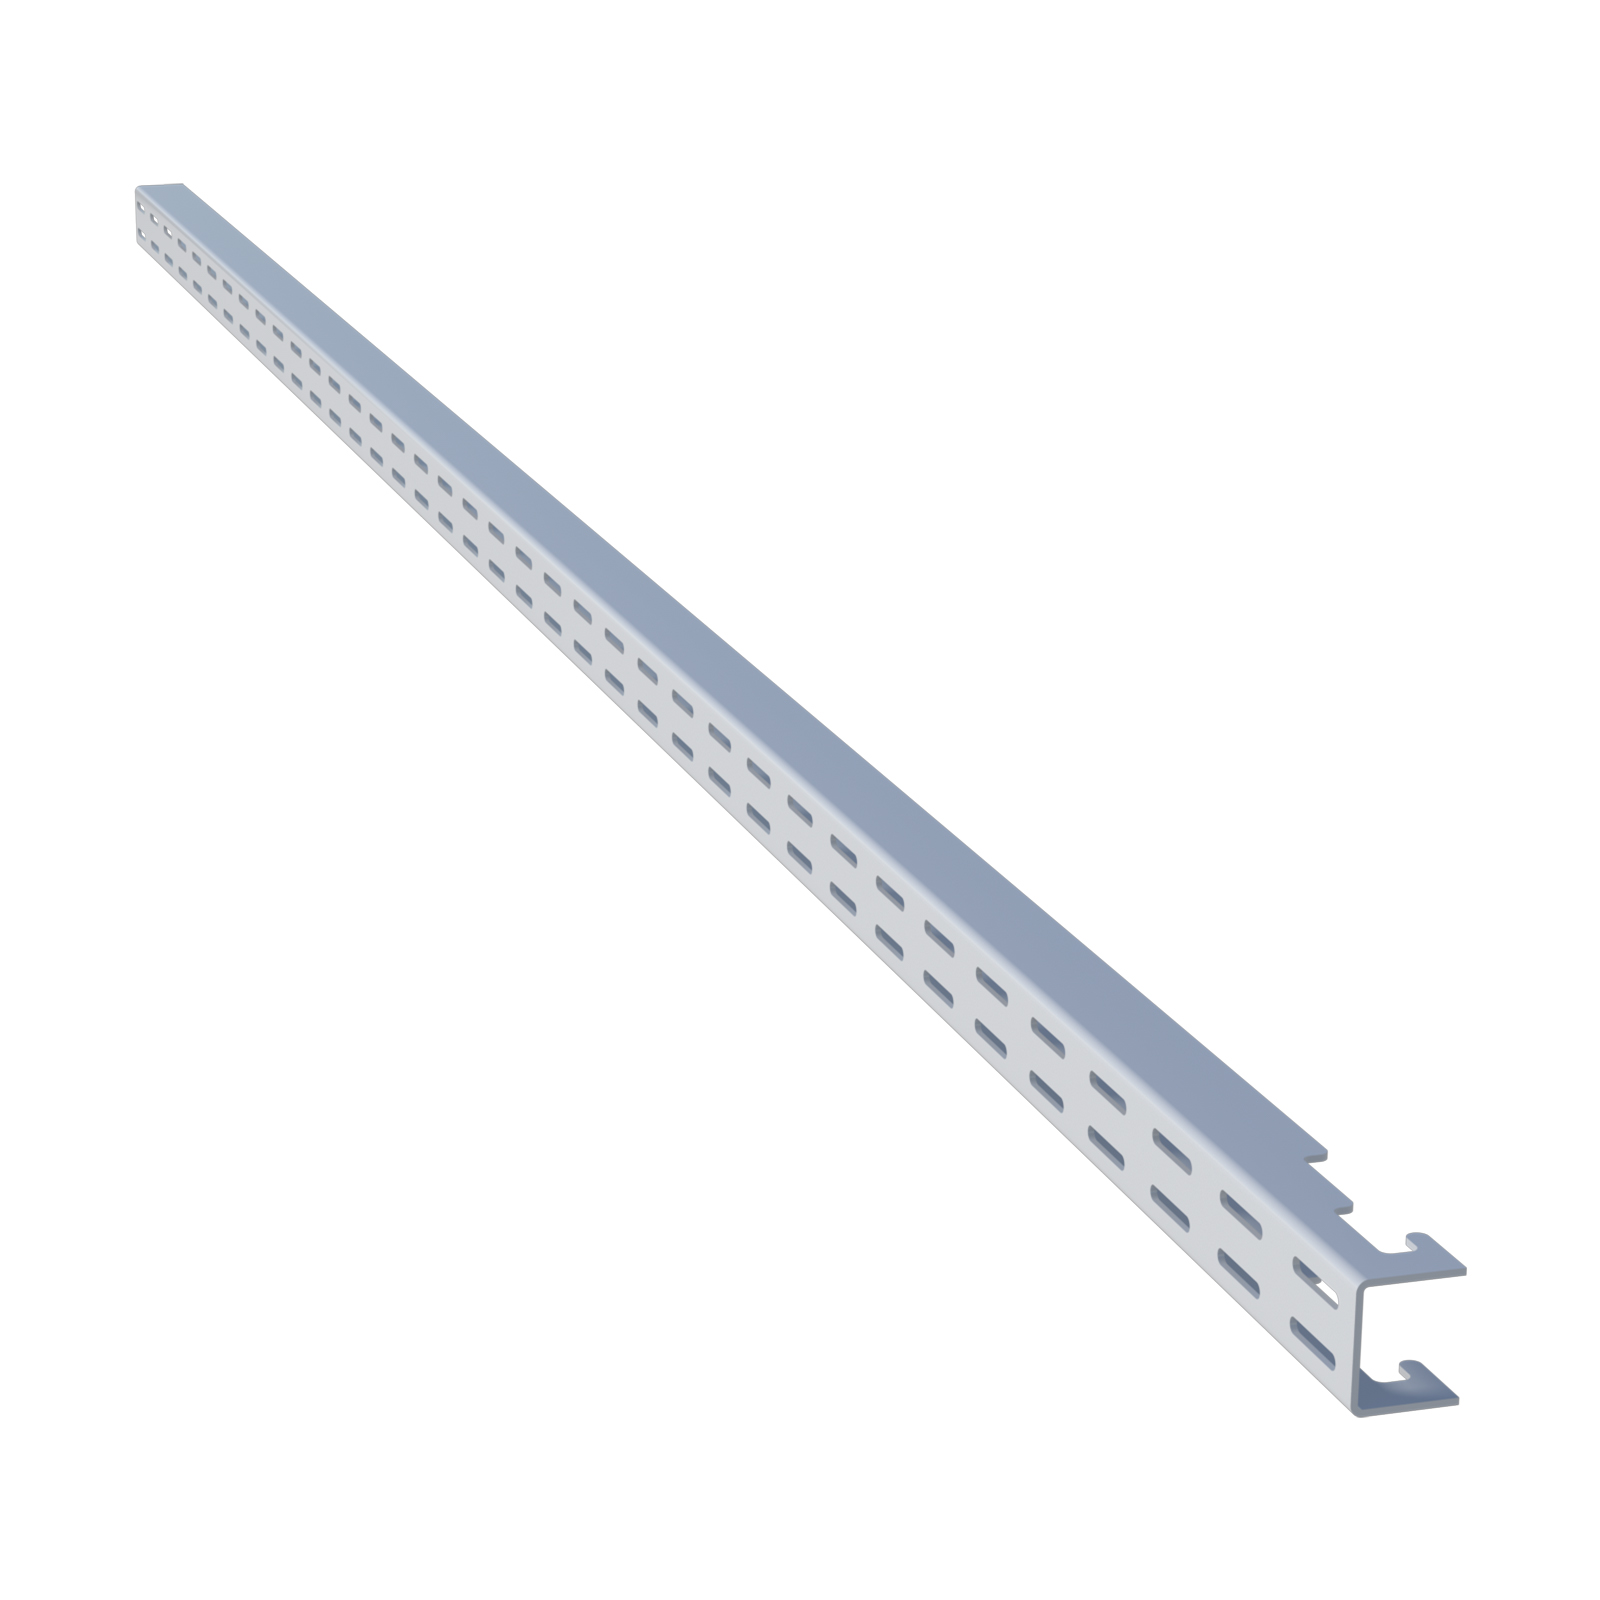 Home Solutions Double Slot Wall Strip White 1206mm